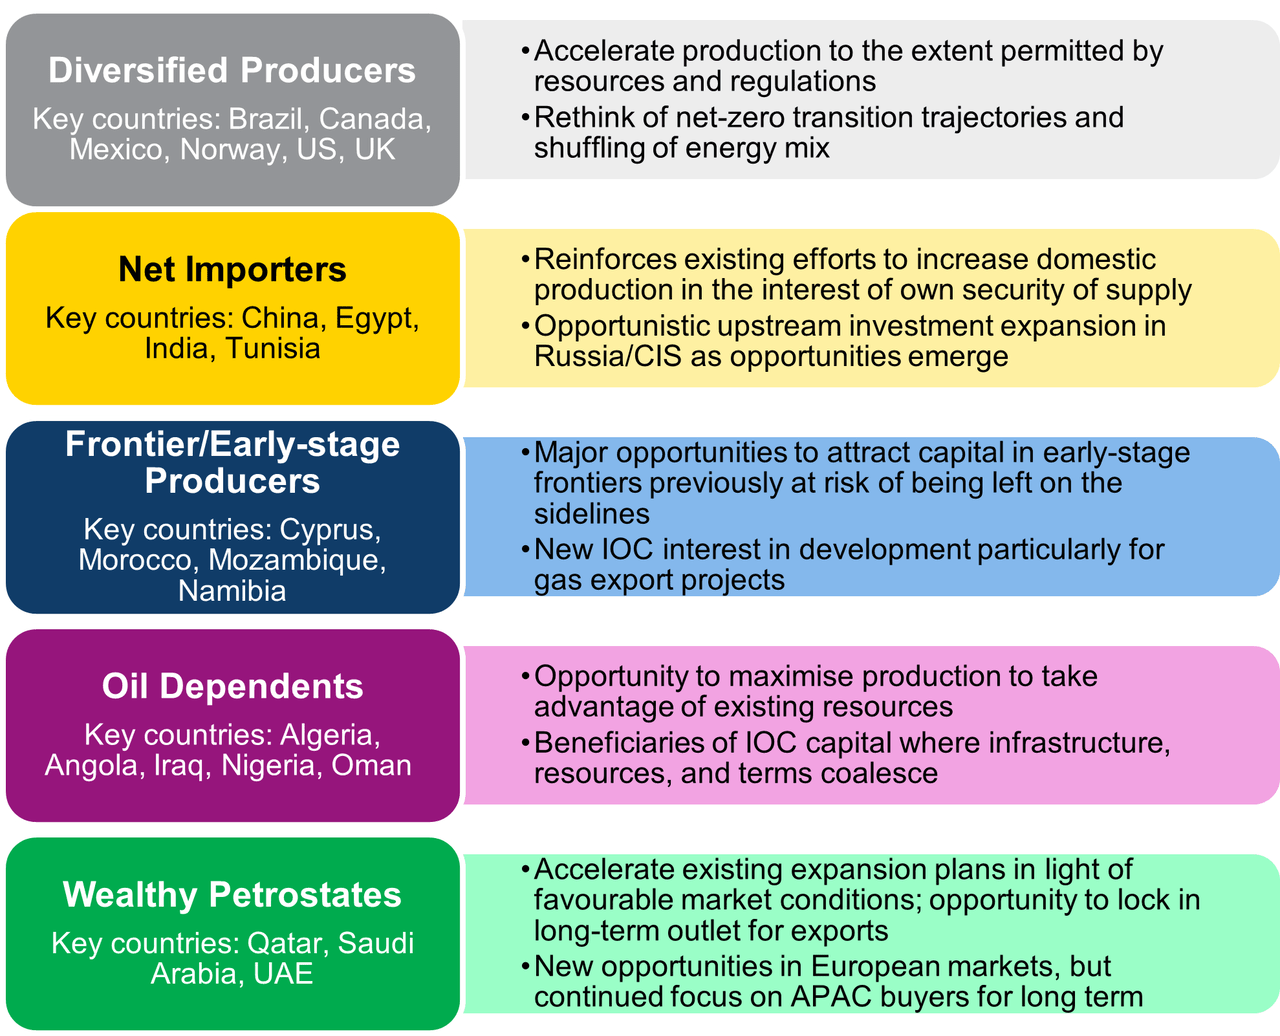 Differences between producer peer groups